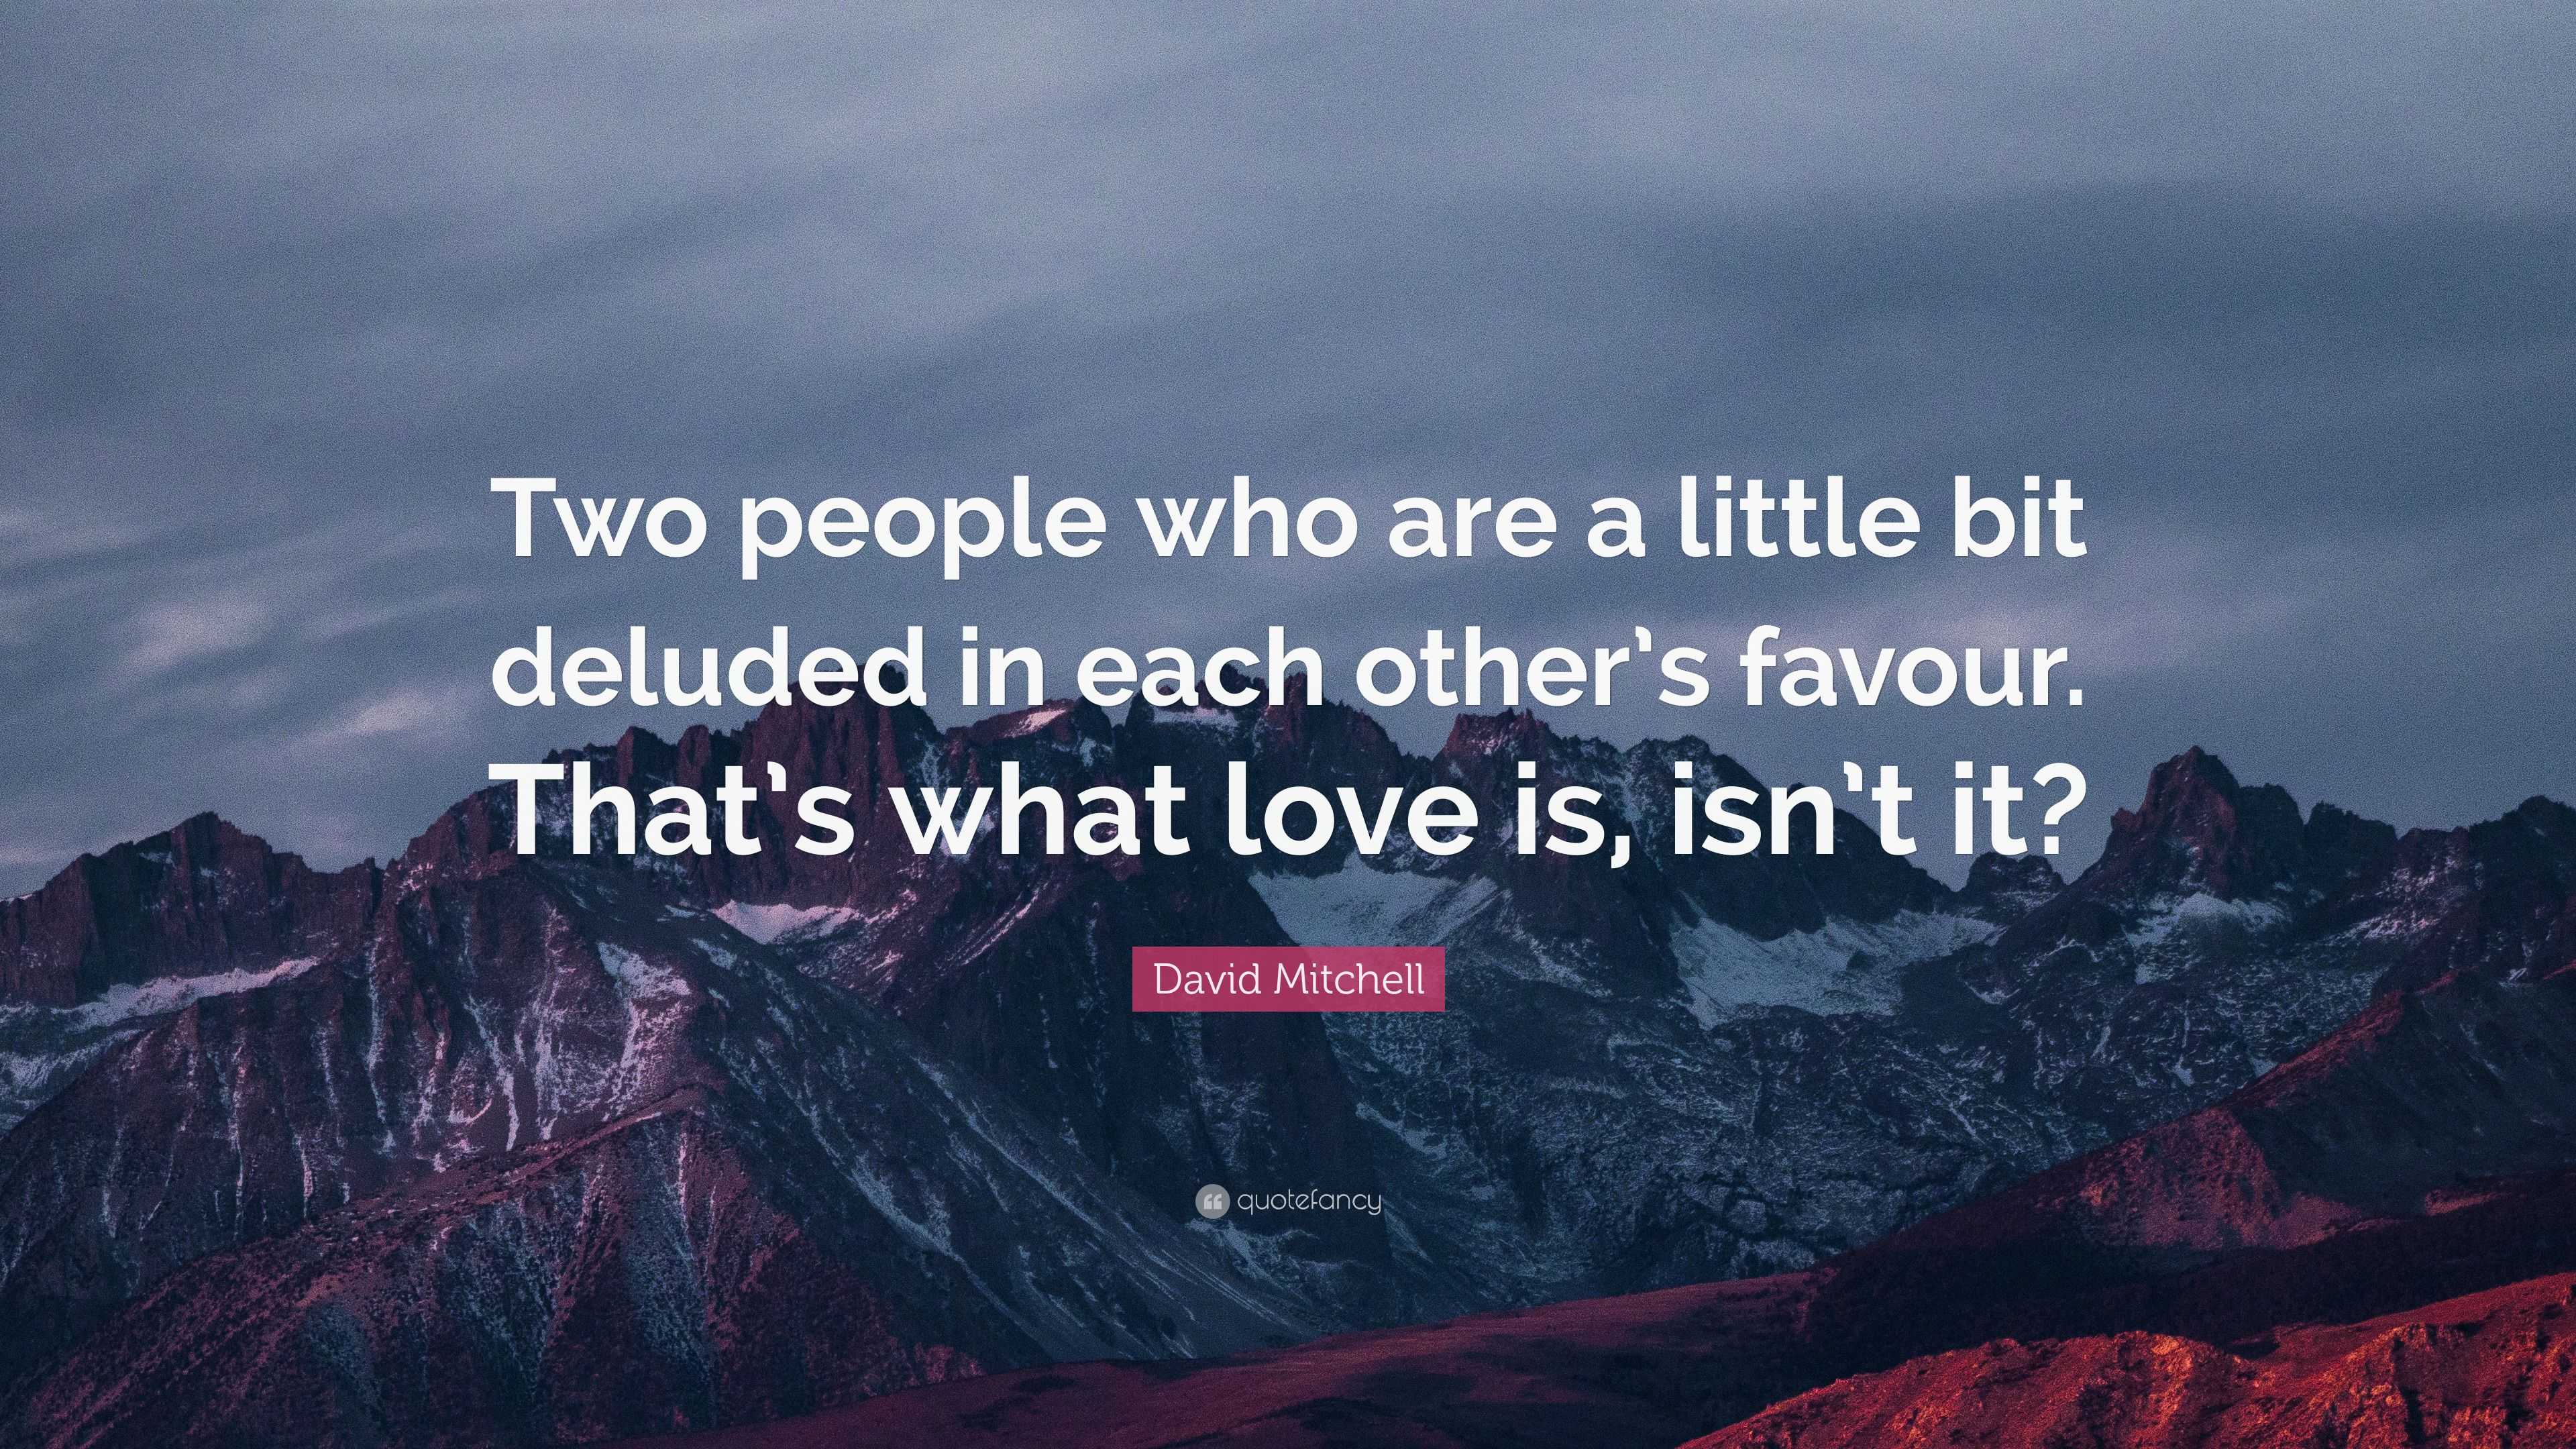 David Mitchell Quote: “Two people who are a little bit deluded in each ...